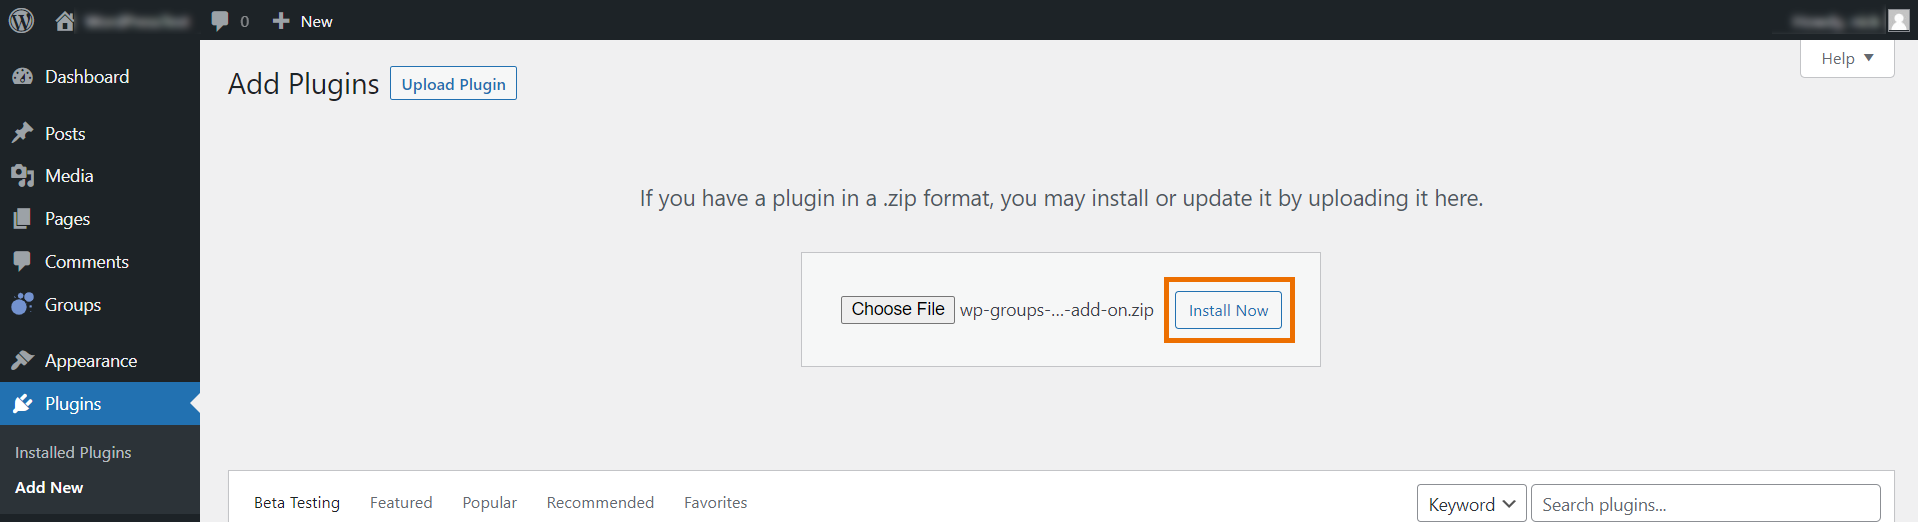 Choose the WordPress Groups plugin integration add-on and install